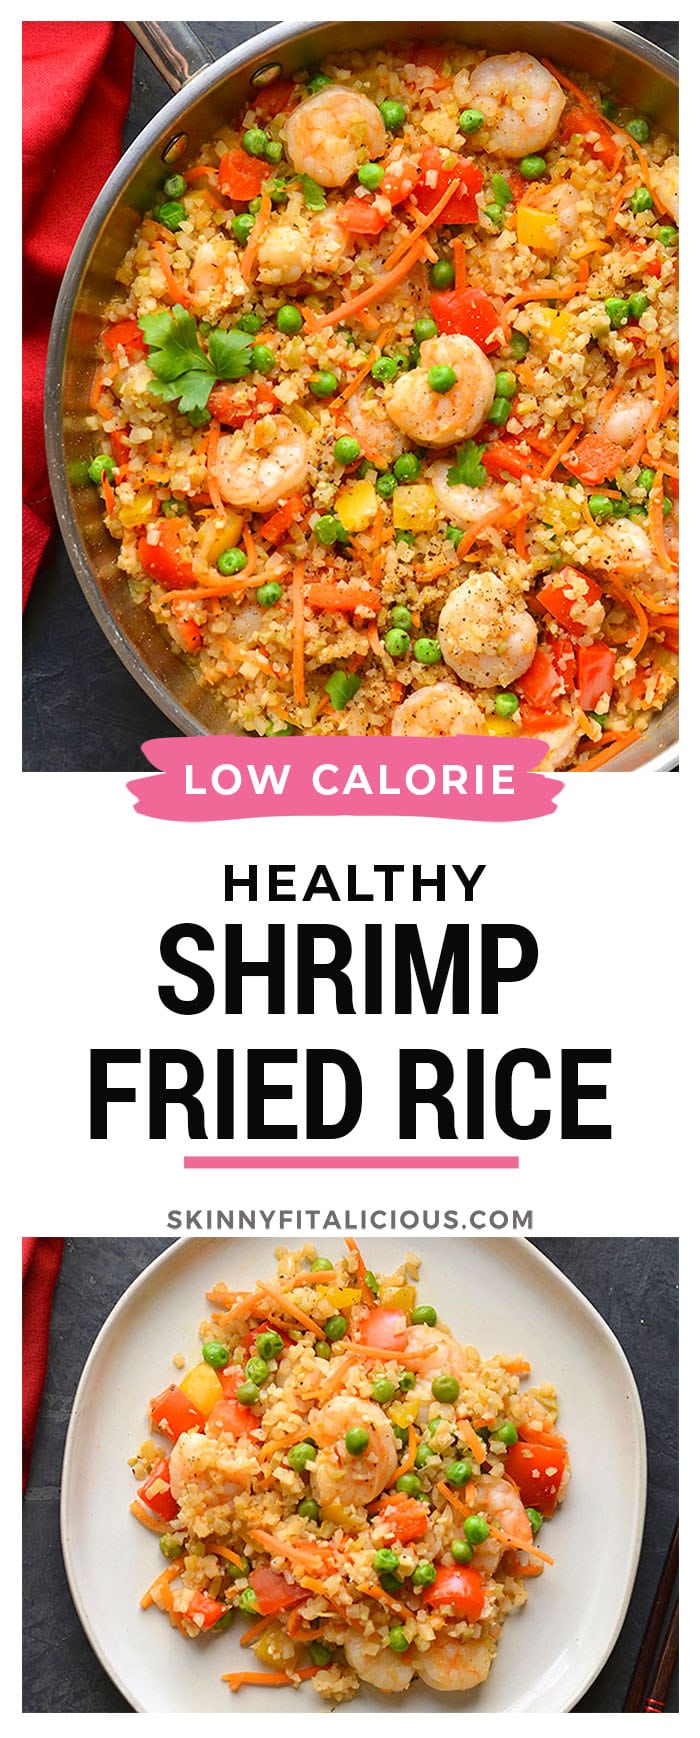 Healthy Shrimp Fried Rice is a veggie packed meal made low carb, low calorie and gluten free. A nutritious and filling meal that's family approved.